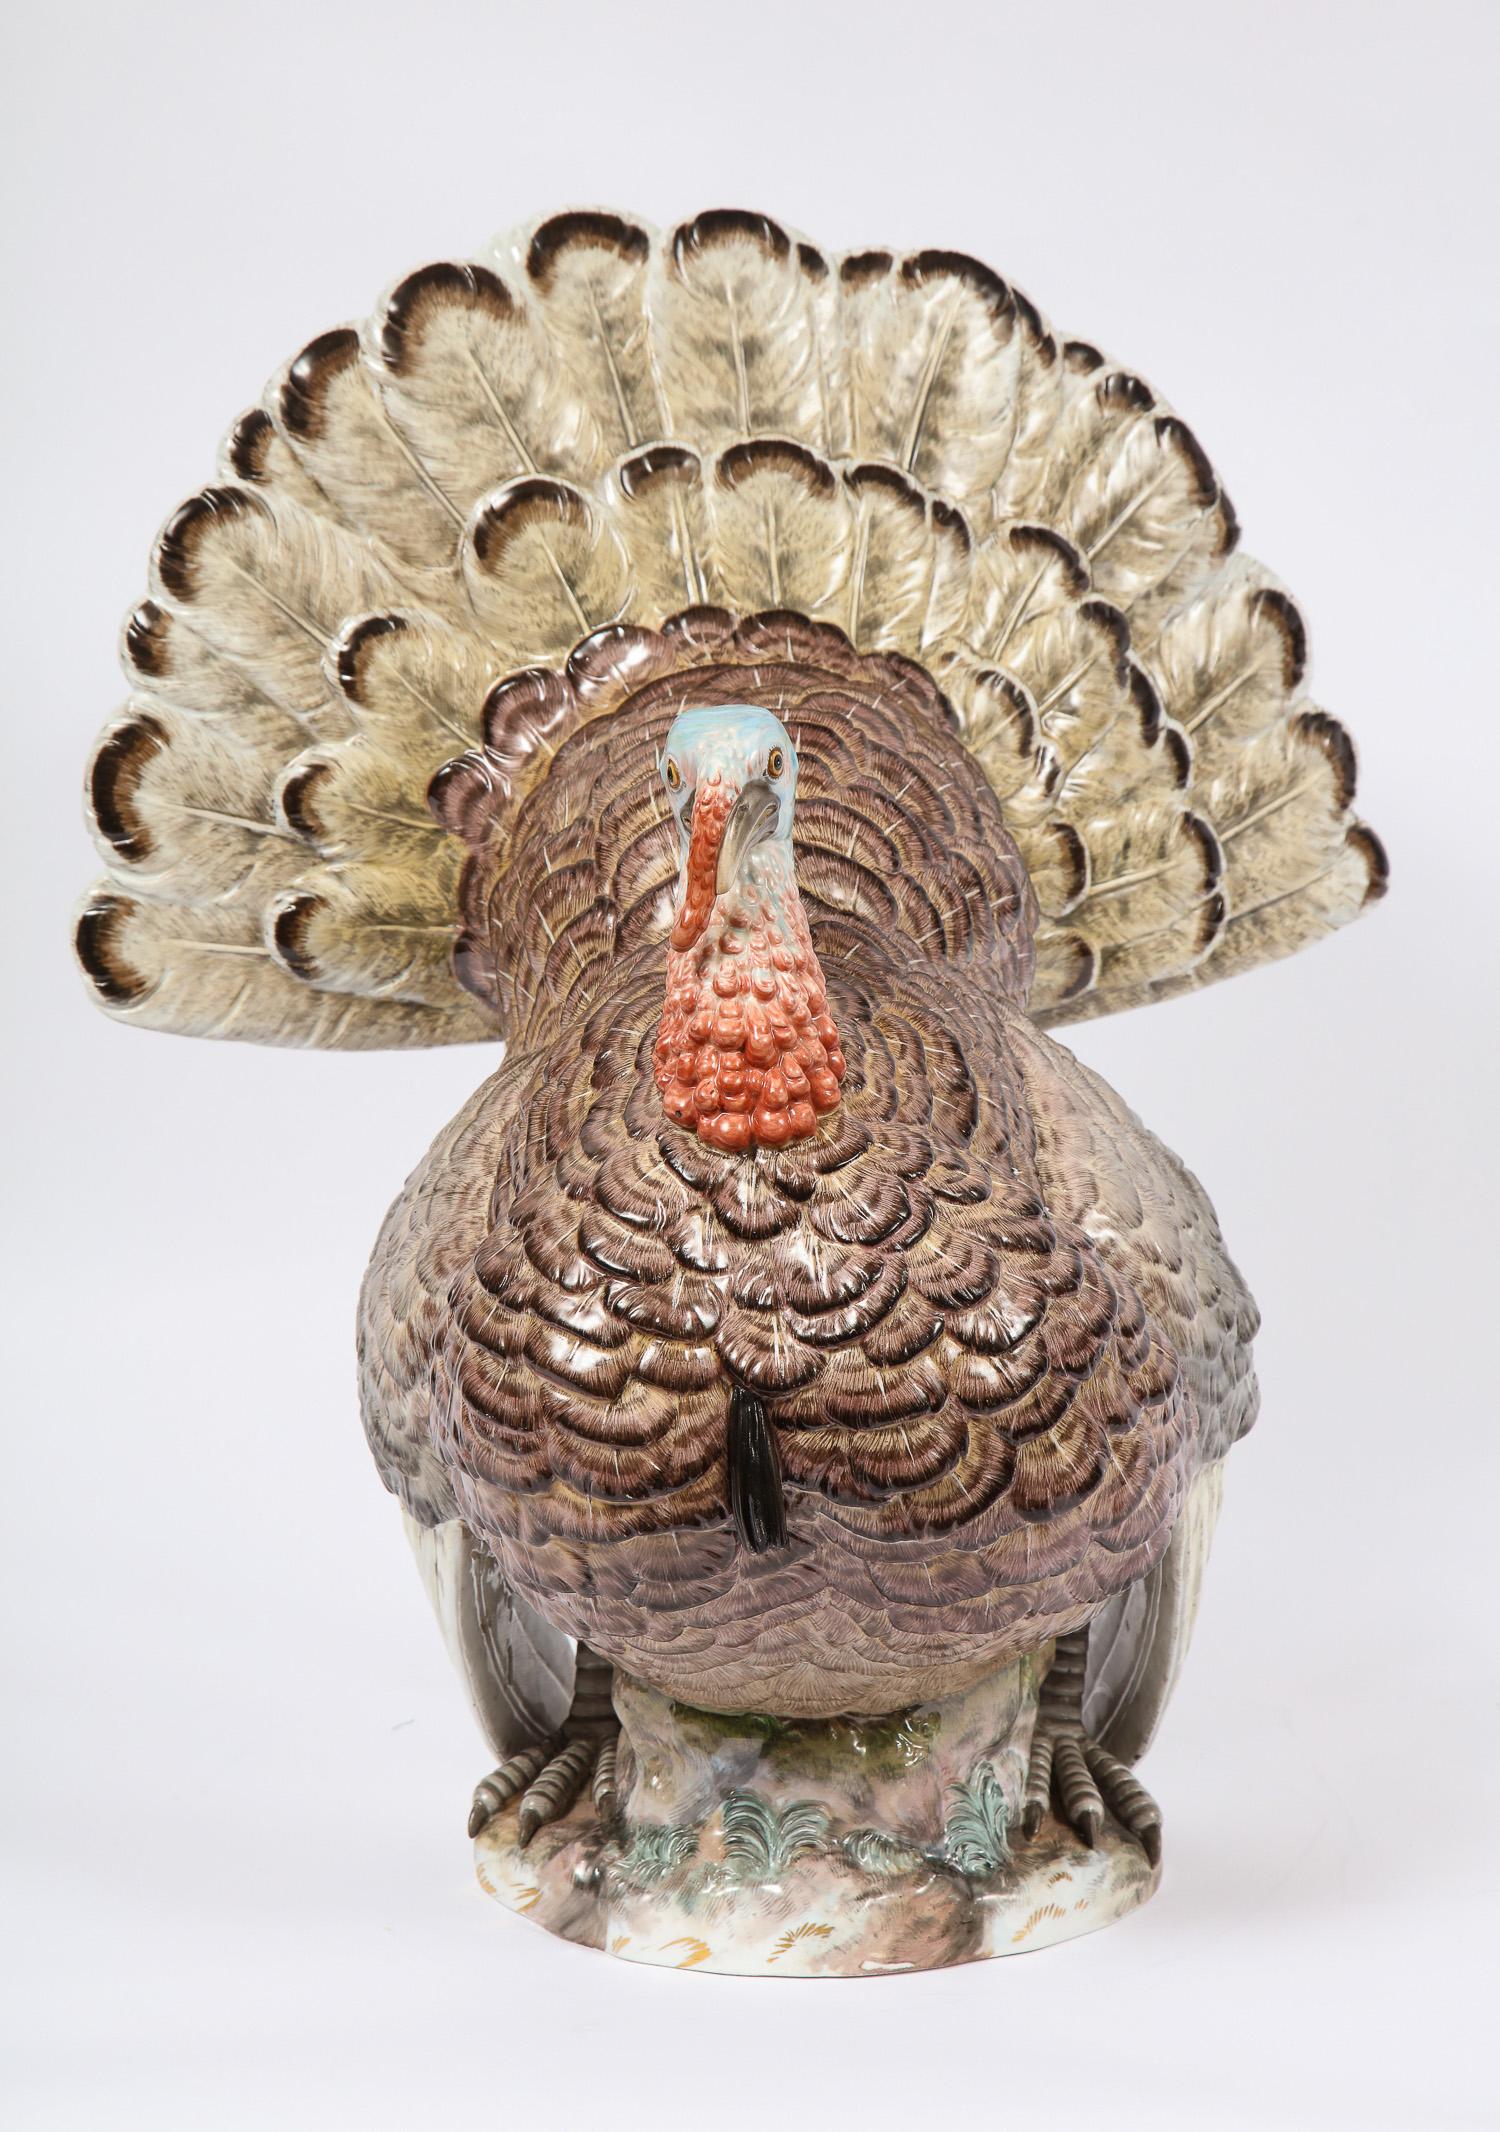 A magnificent and rare life-sized 19th century Meissen Porcelain figure of a Turkey. This is truly an exceptional piece. The figurine has been outstandingly hand carved and sculpted to take on the exact life-size dimensions of a turkey. Beautifully